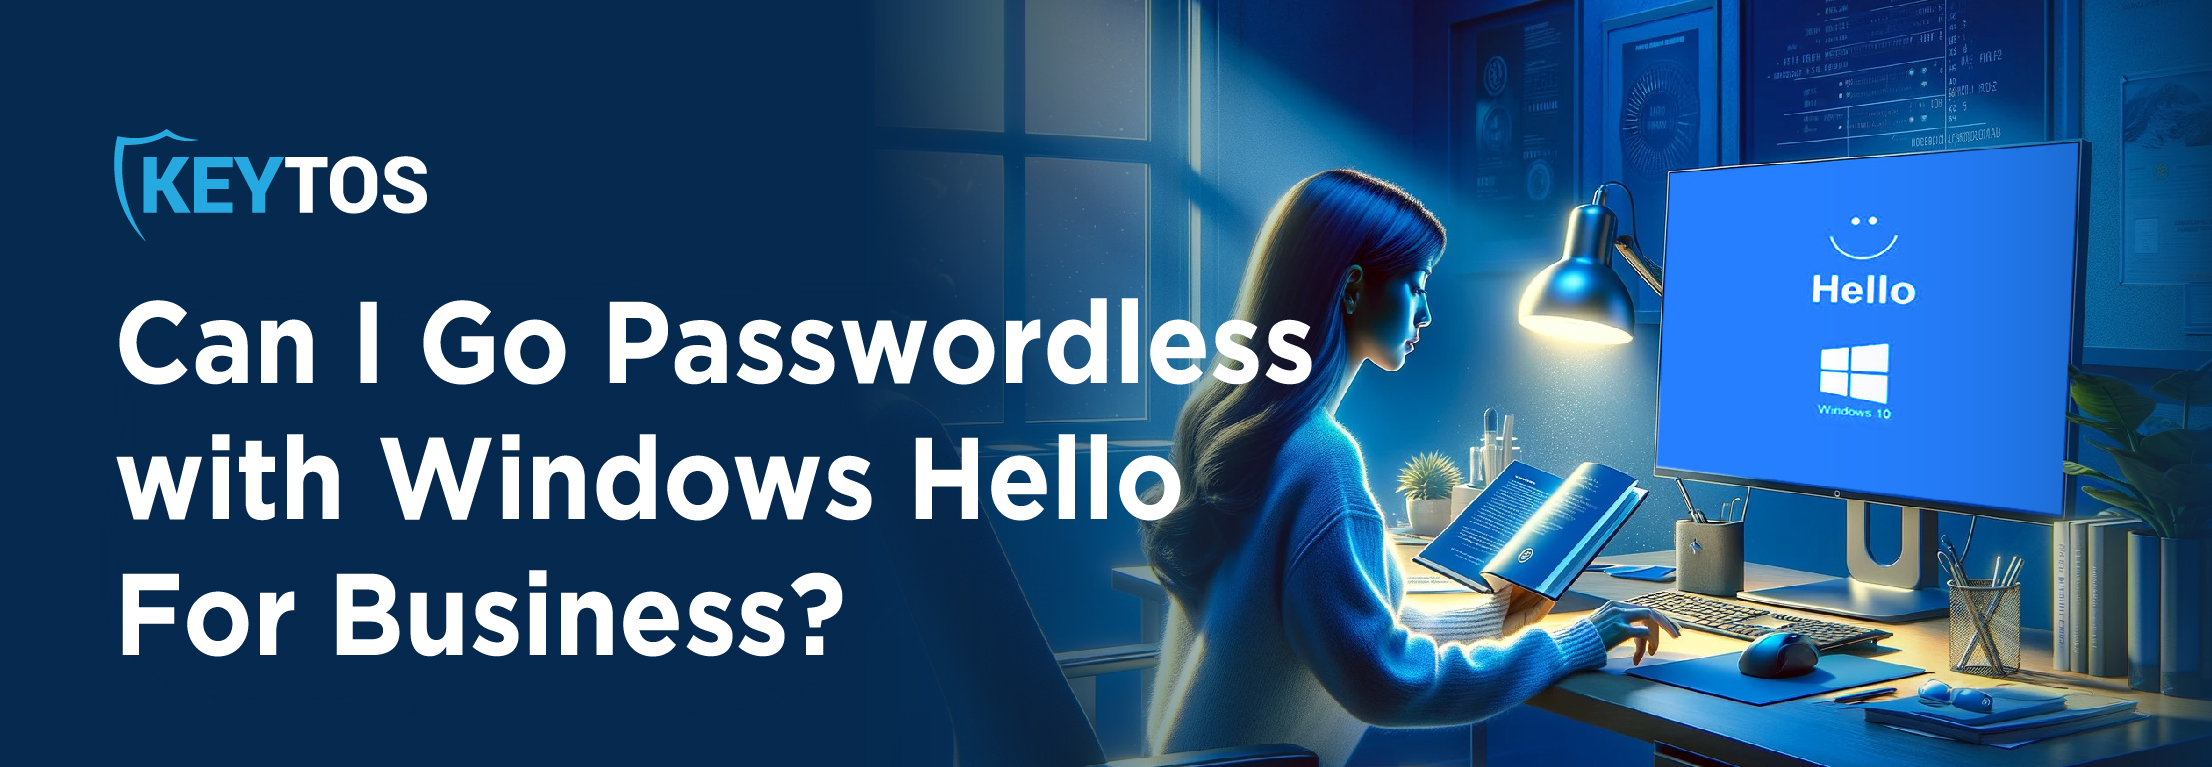 Can I Go Passwordless with Windows Hello for Business? or do I need FIDO2 and Entra CBA